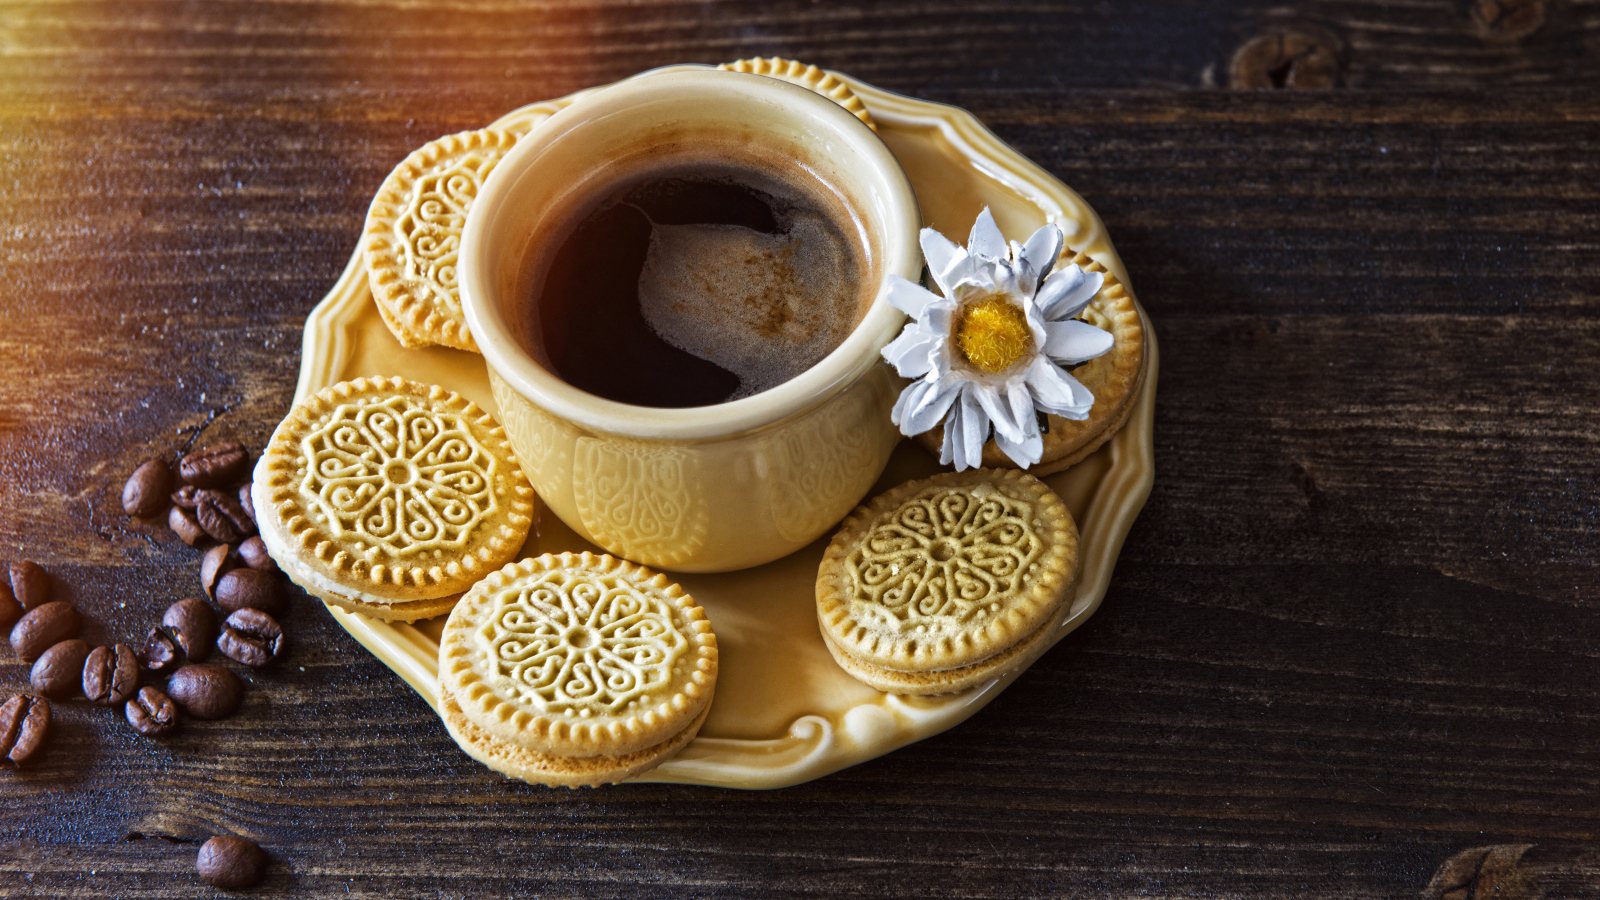 A cup of coffee on a saucer with biscuits